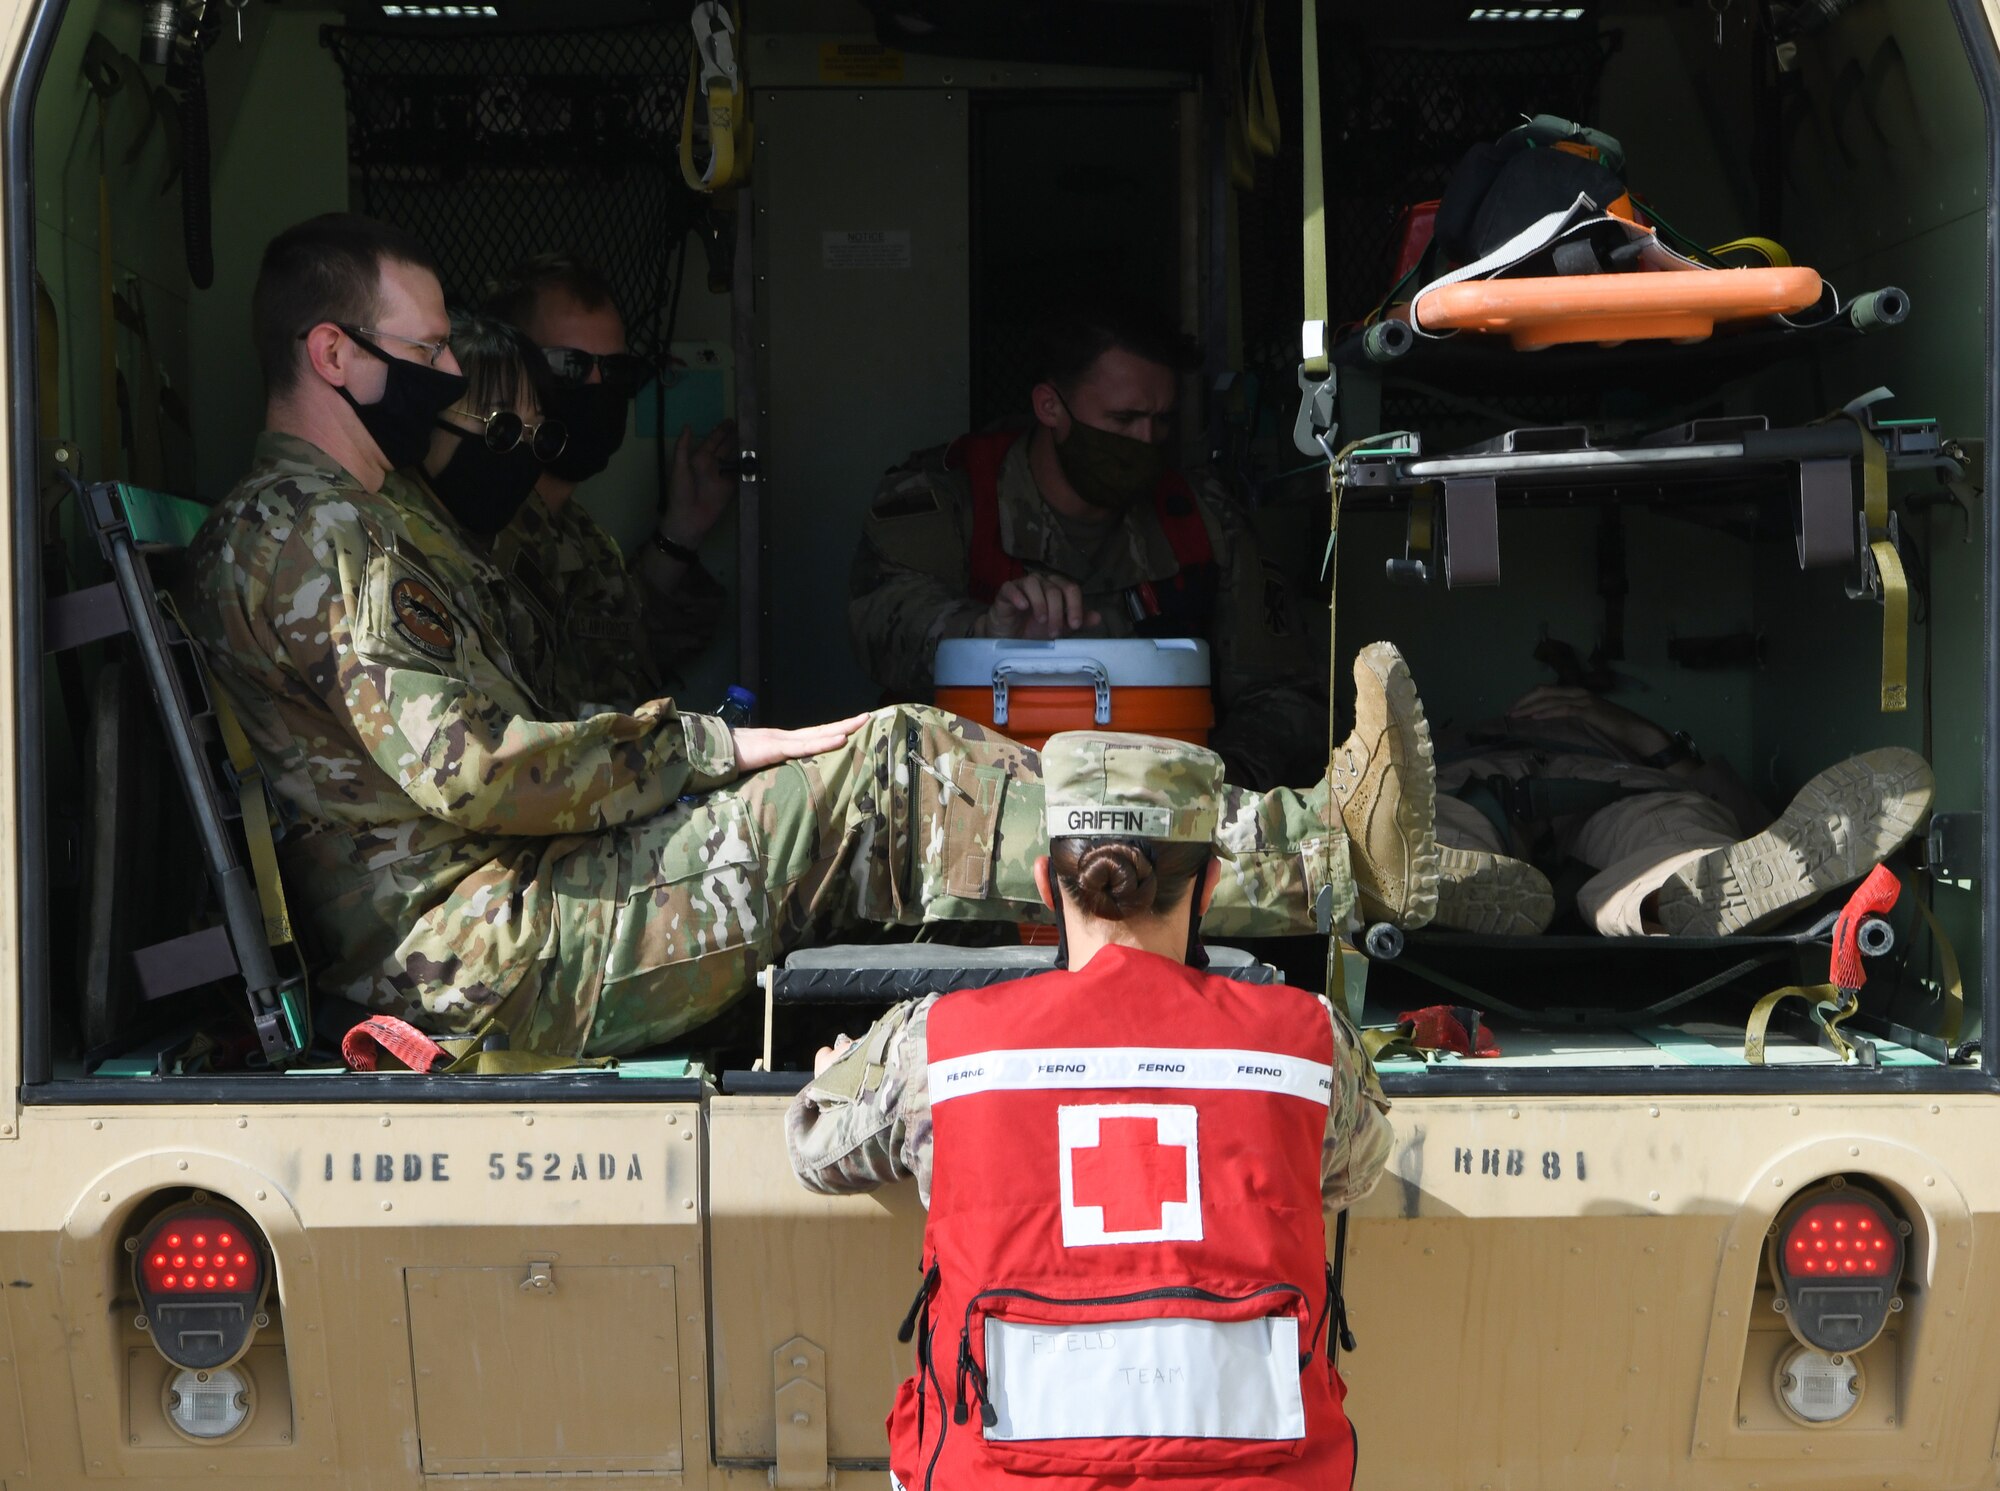 First responders from the 380th Expeditionary Medical Group participate in a Major Accident Response Exercise Thursday, Sept. 3, 2020 at Al Dhafra Air Base, United Arab Emirates.